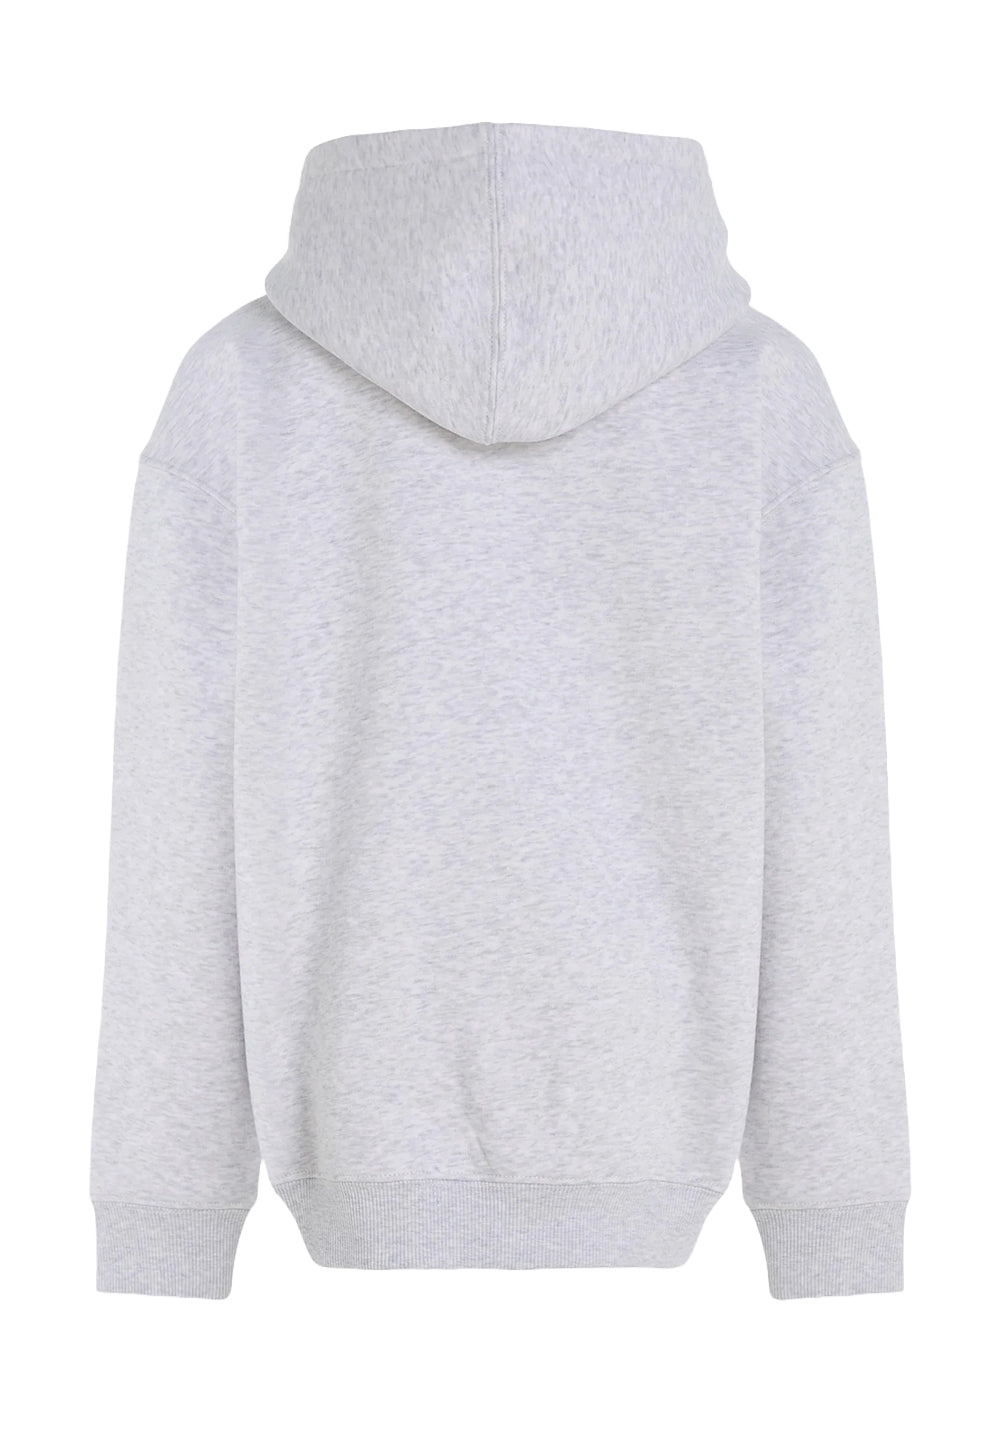 Gray hoodie for boys